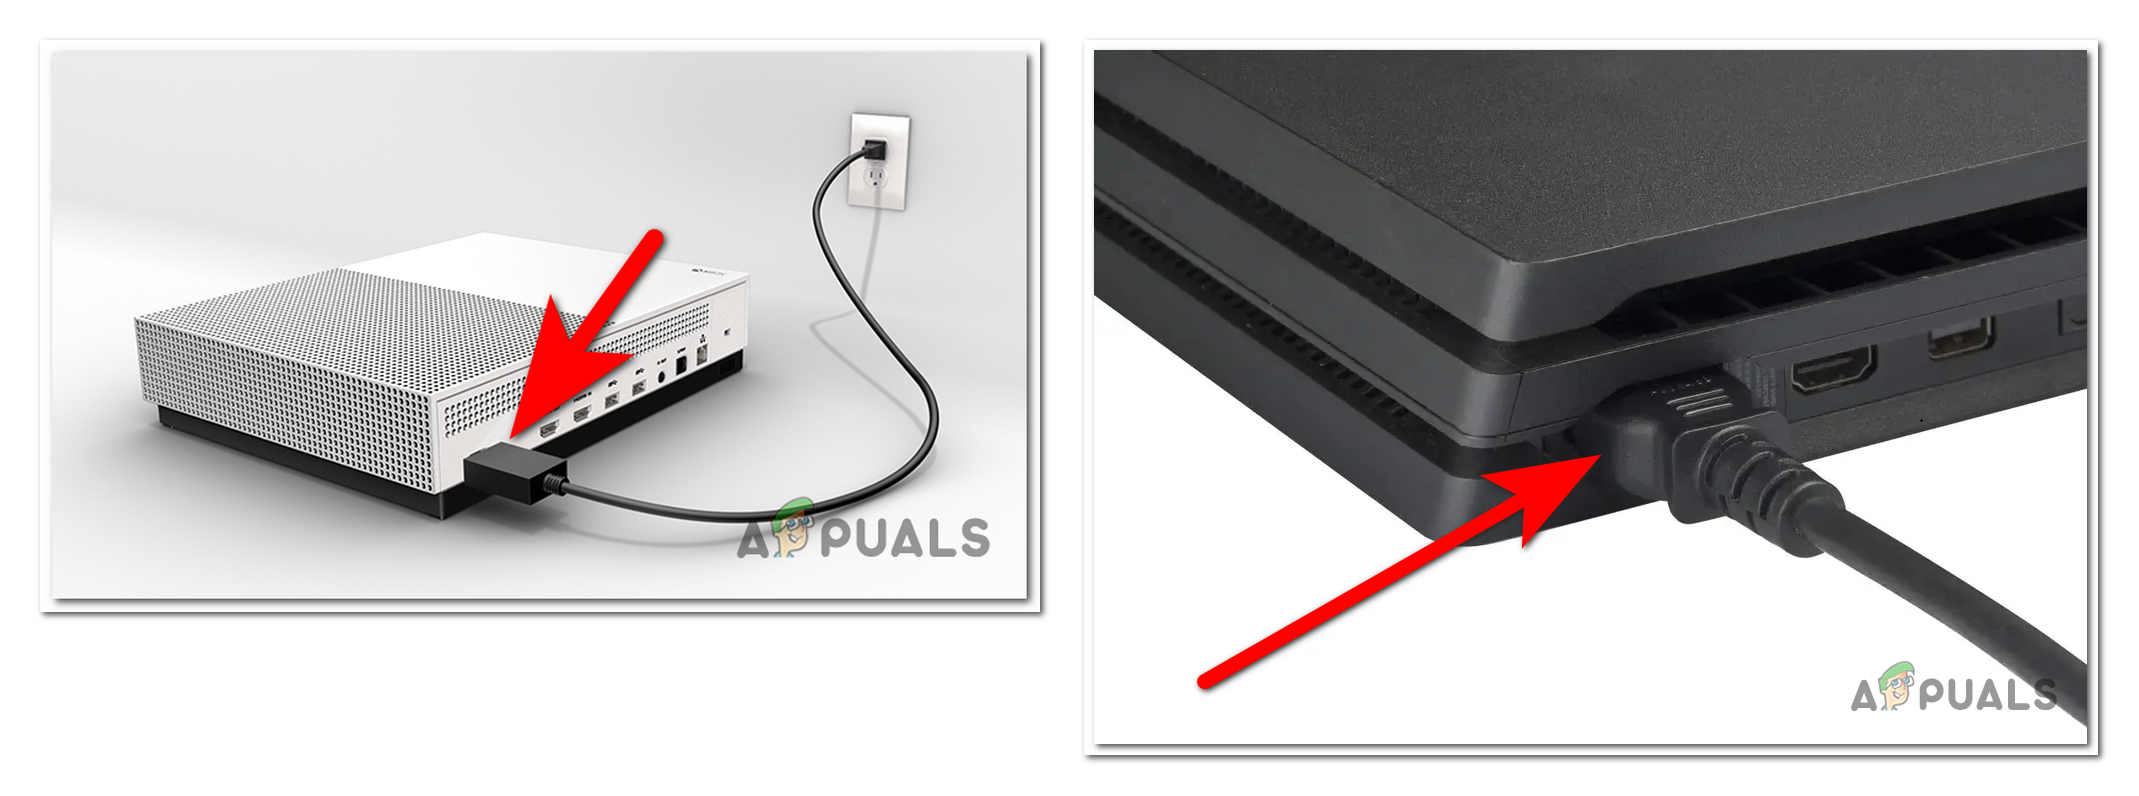 Unplugging the power cord and LAN from console